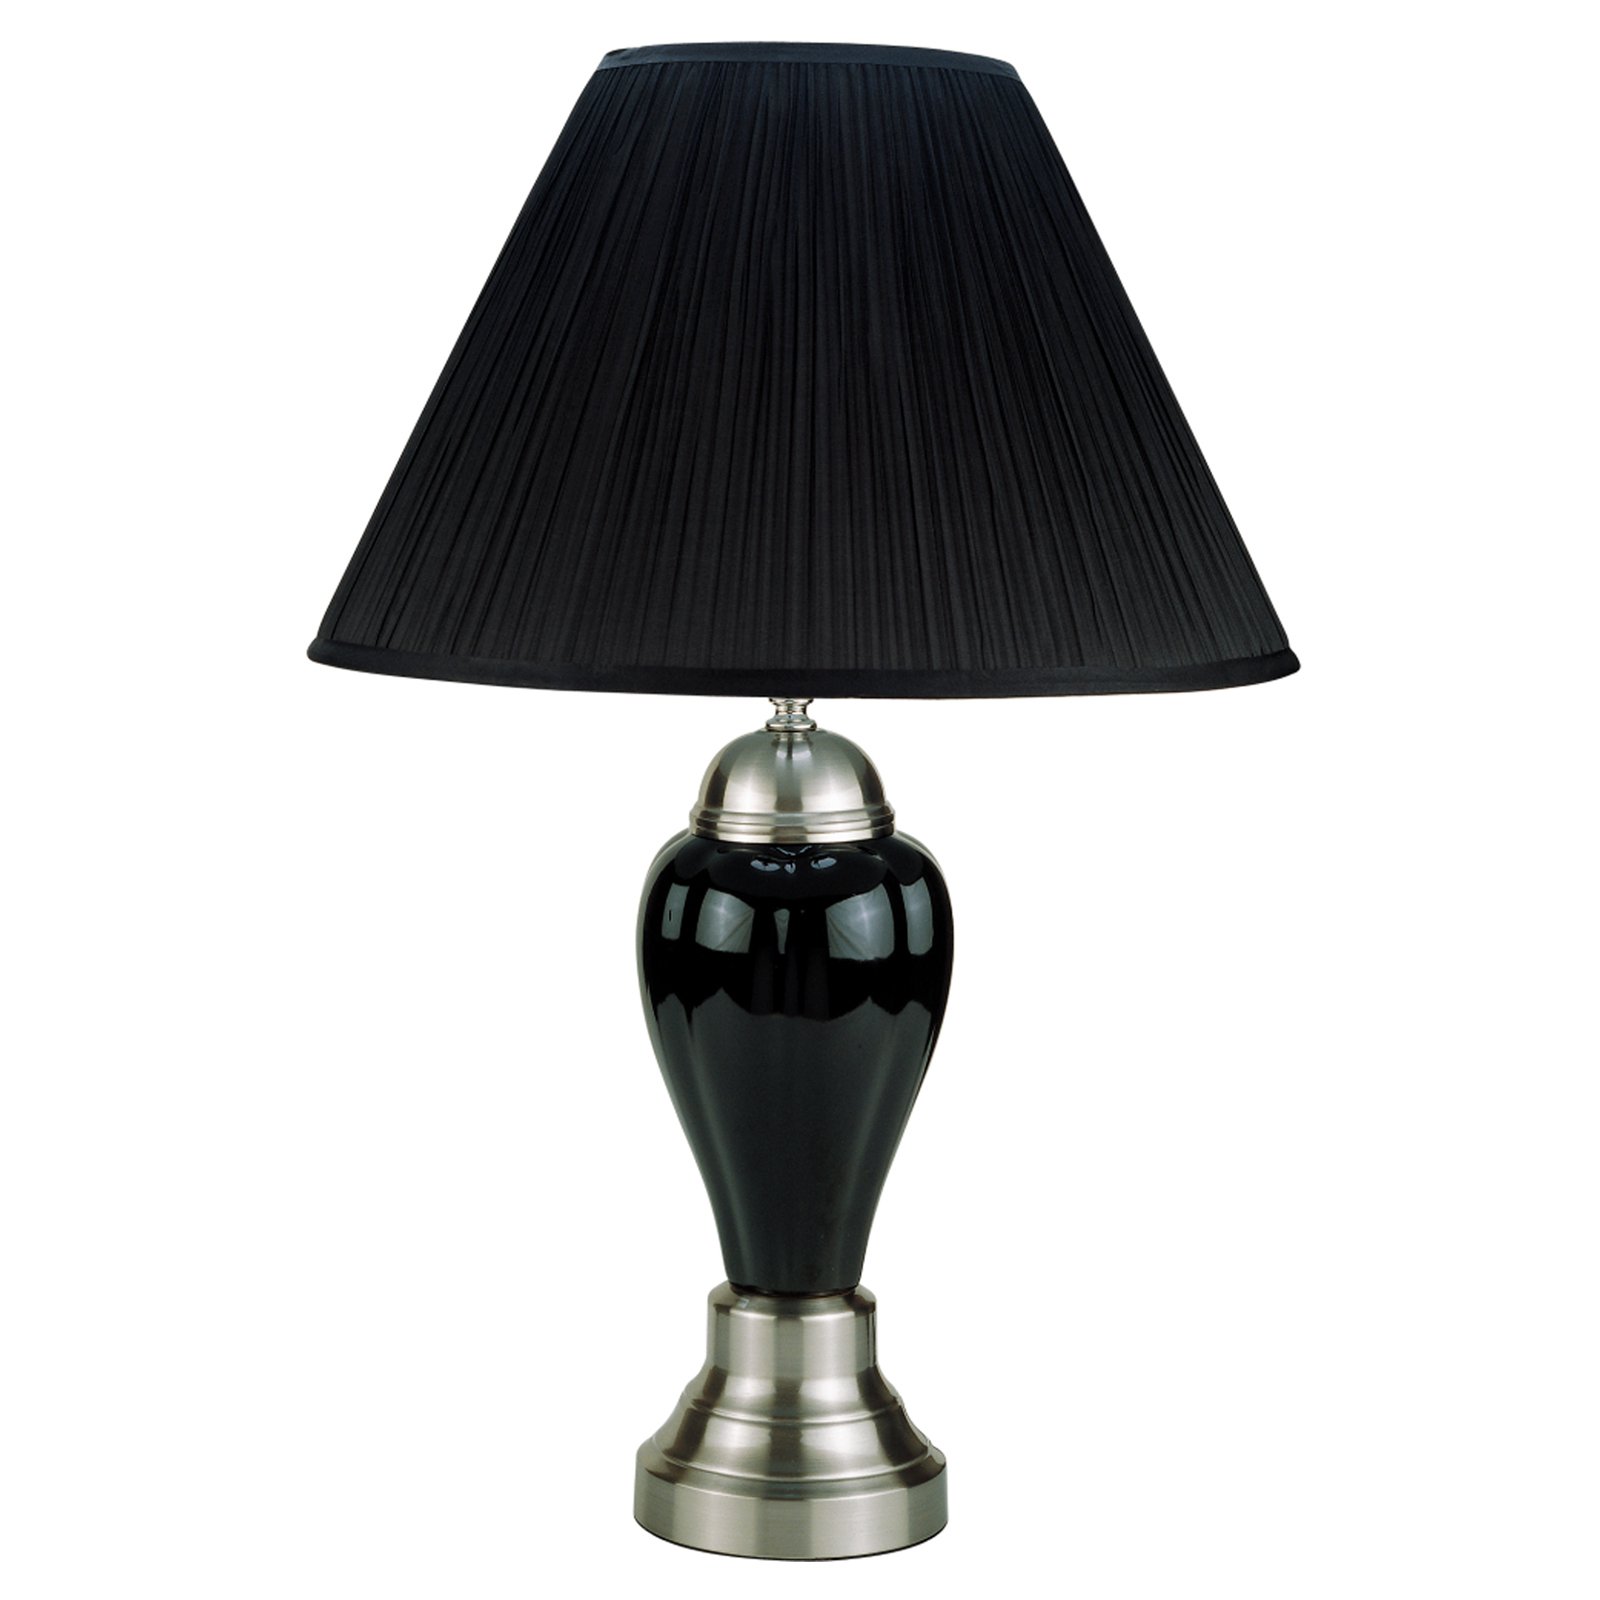 Silver/Ivory Ceramic Table Lamp, 27" - image 1 of 2